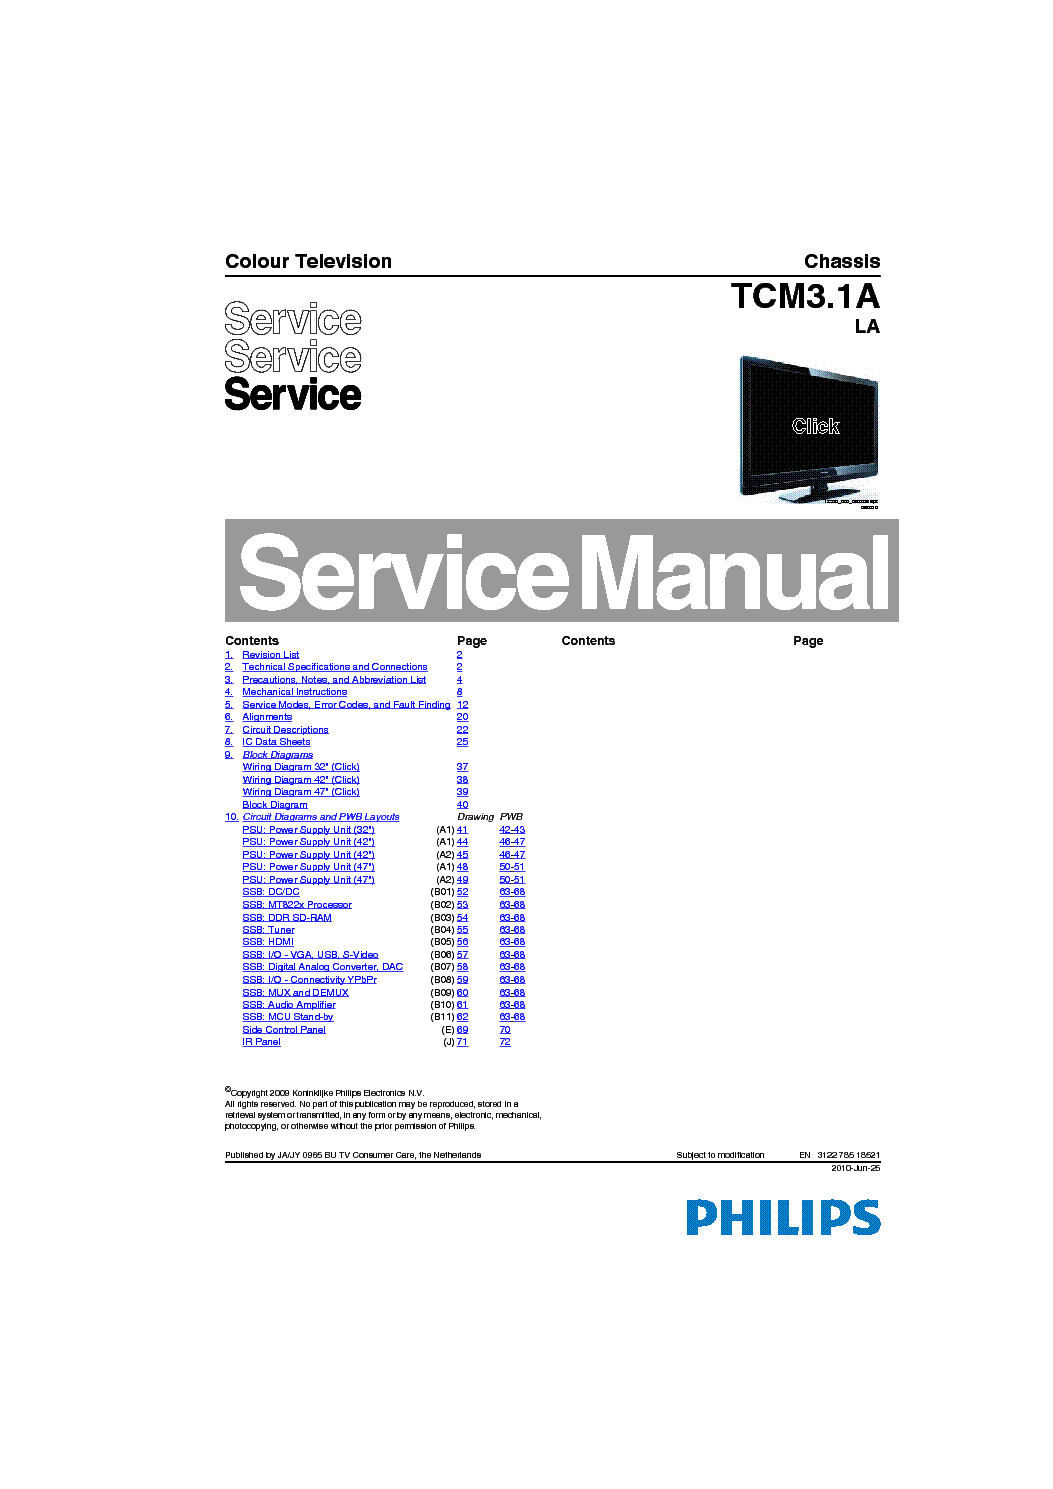 PHILIPS CHASSIS TCM3.1A-LA TOSHIBA C910 SM service manual (1st page)